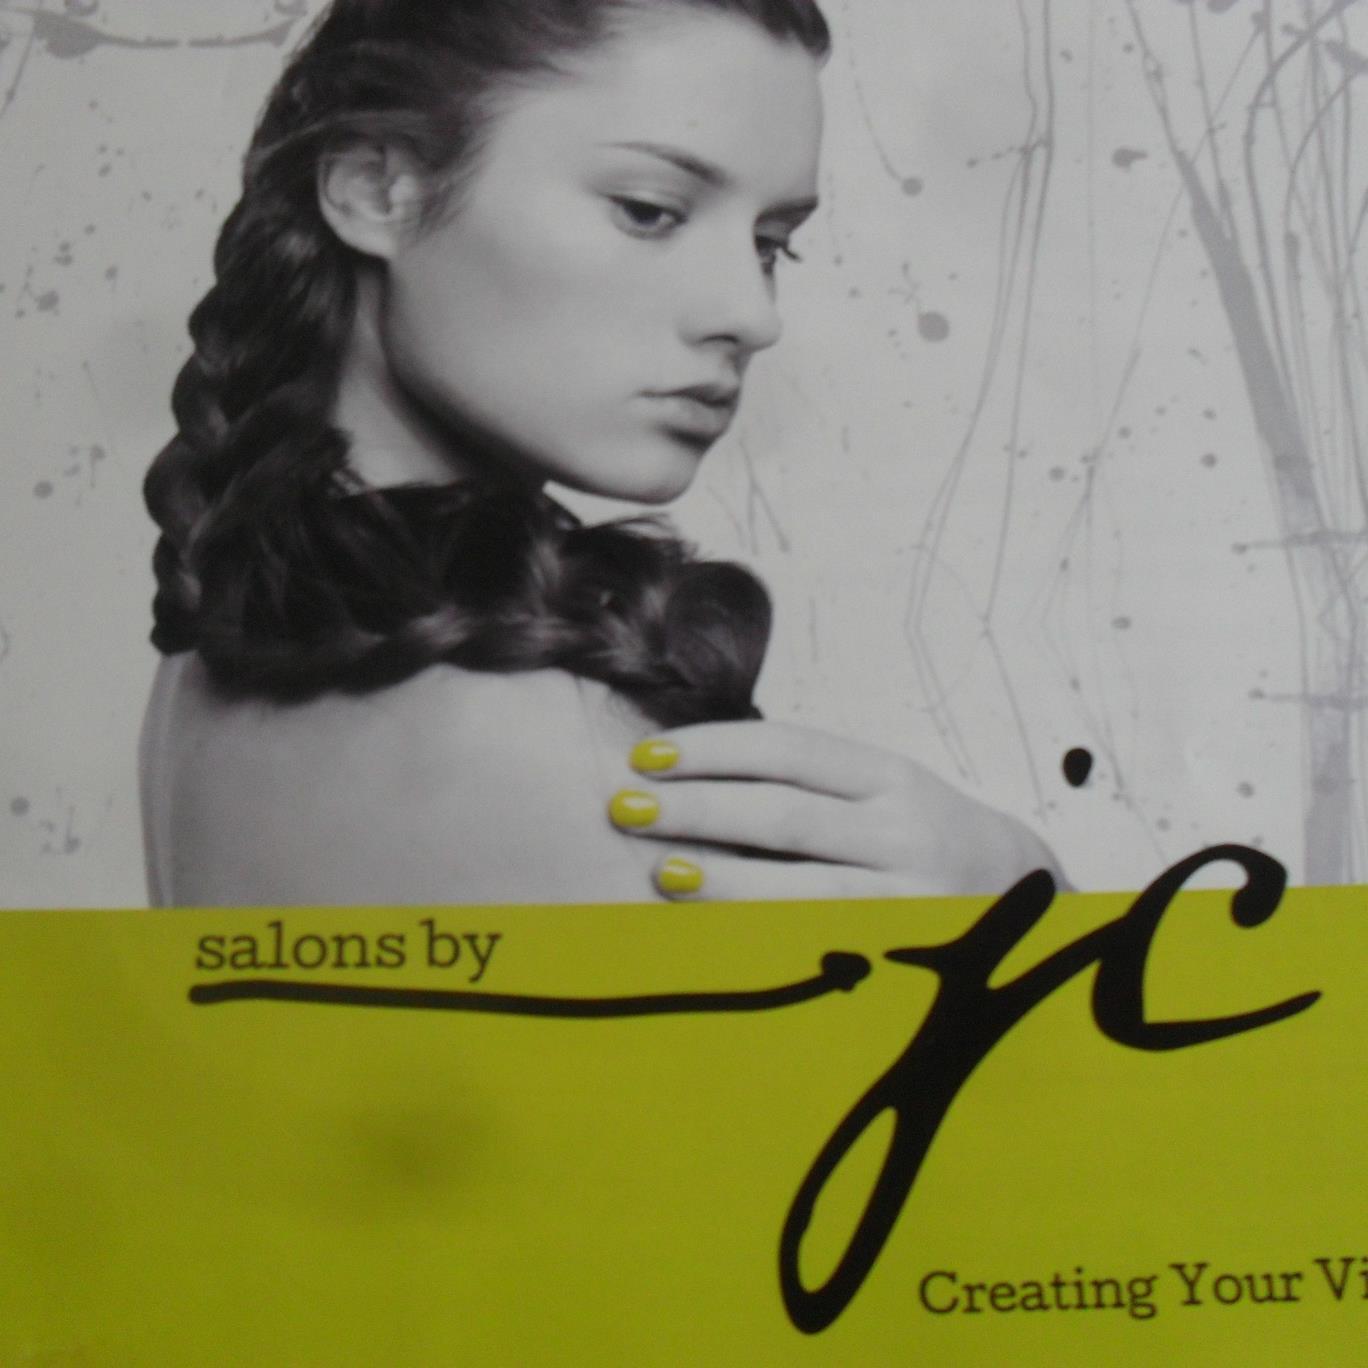 Salons By JC  Suites
 Naples Florida                     
 New and improved Salon Suites        Rent From: Beatrice Cooper   
Direct #  239-290-2894